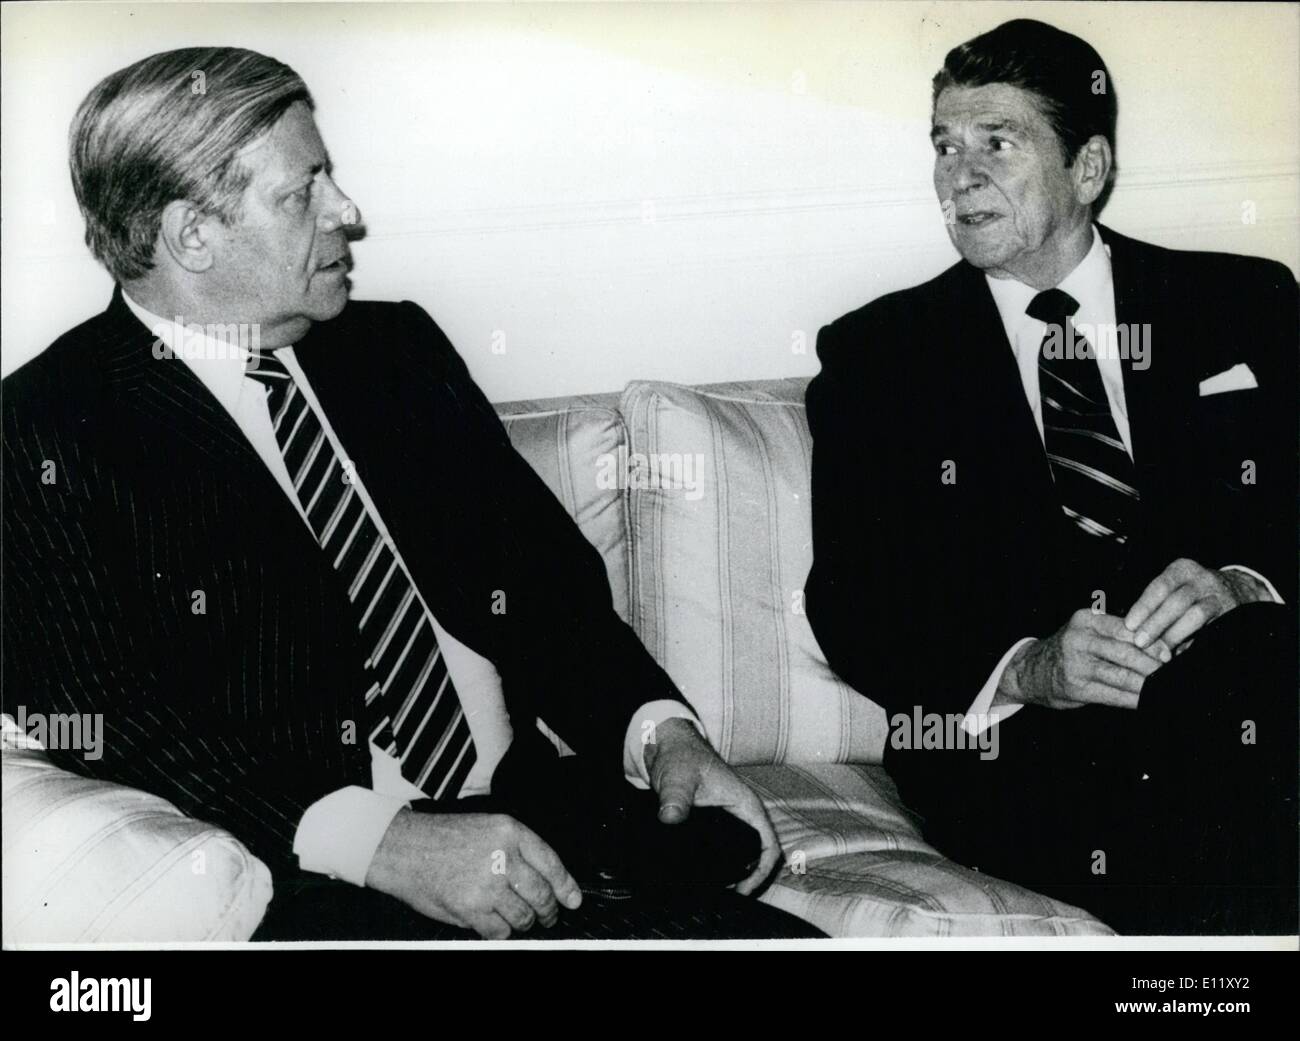 Nov. 11, 1980 - As the first foreign leader of the government on November 20th. 1980 the West German Chancellor Helmut Schmidt met Ronald Reagan after his election to the American President. OPS:- Helmut Schmidt (left) during a talk with Ronald Reagan (right) in Washington. Stock Photo